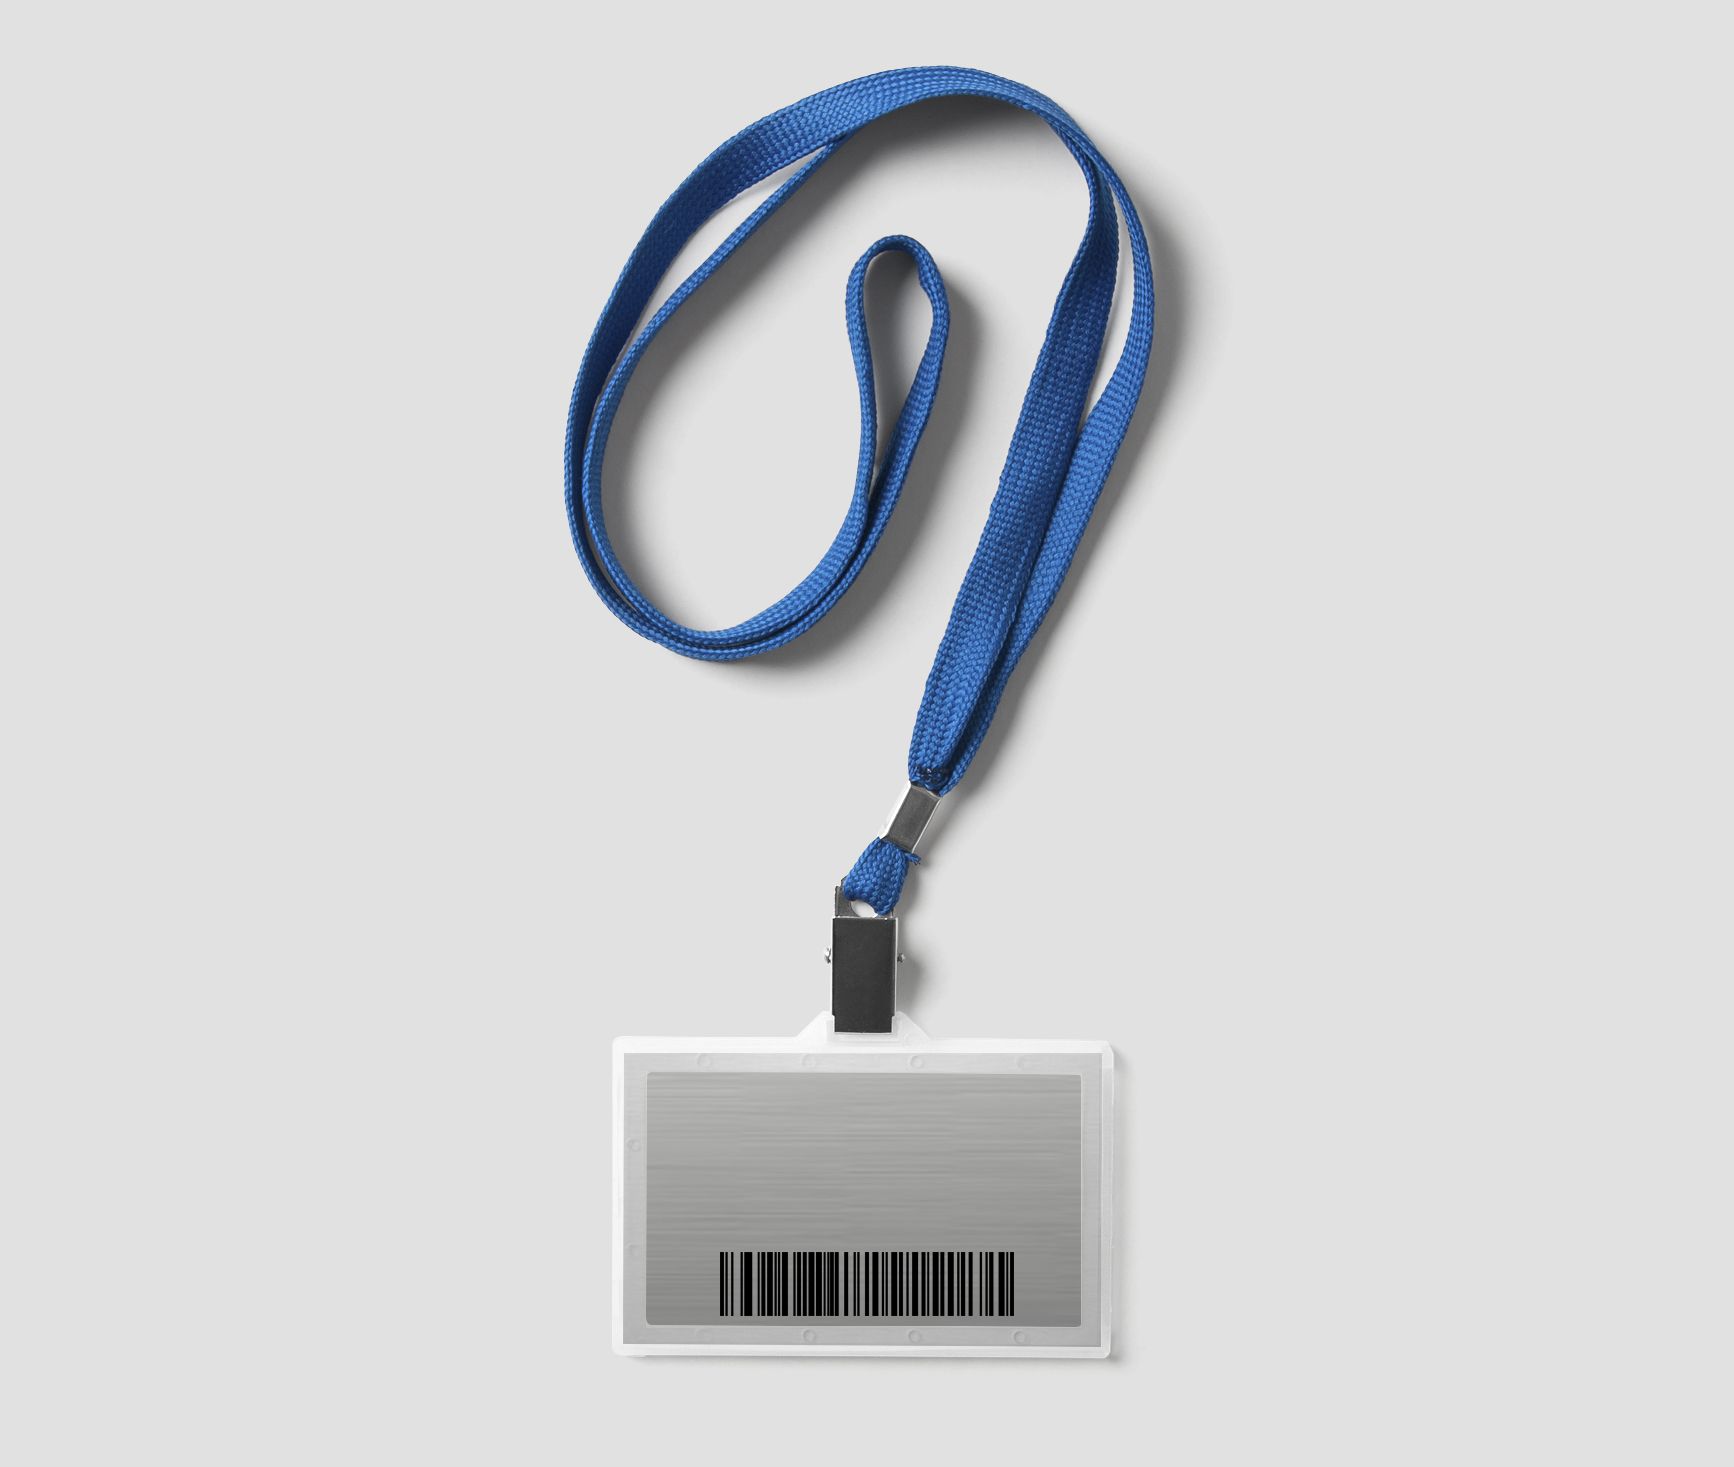 Picture of a barcode printing credential solution for customization